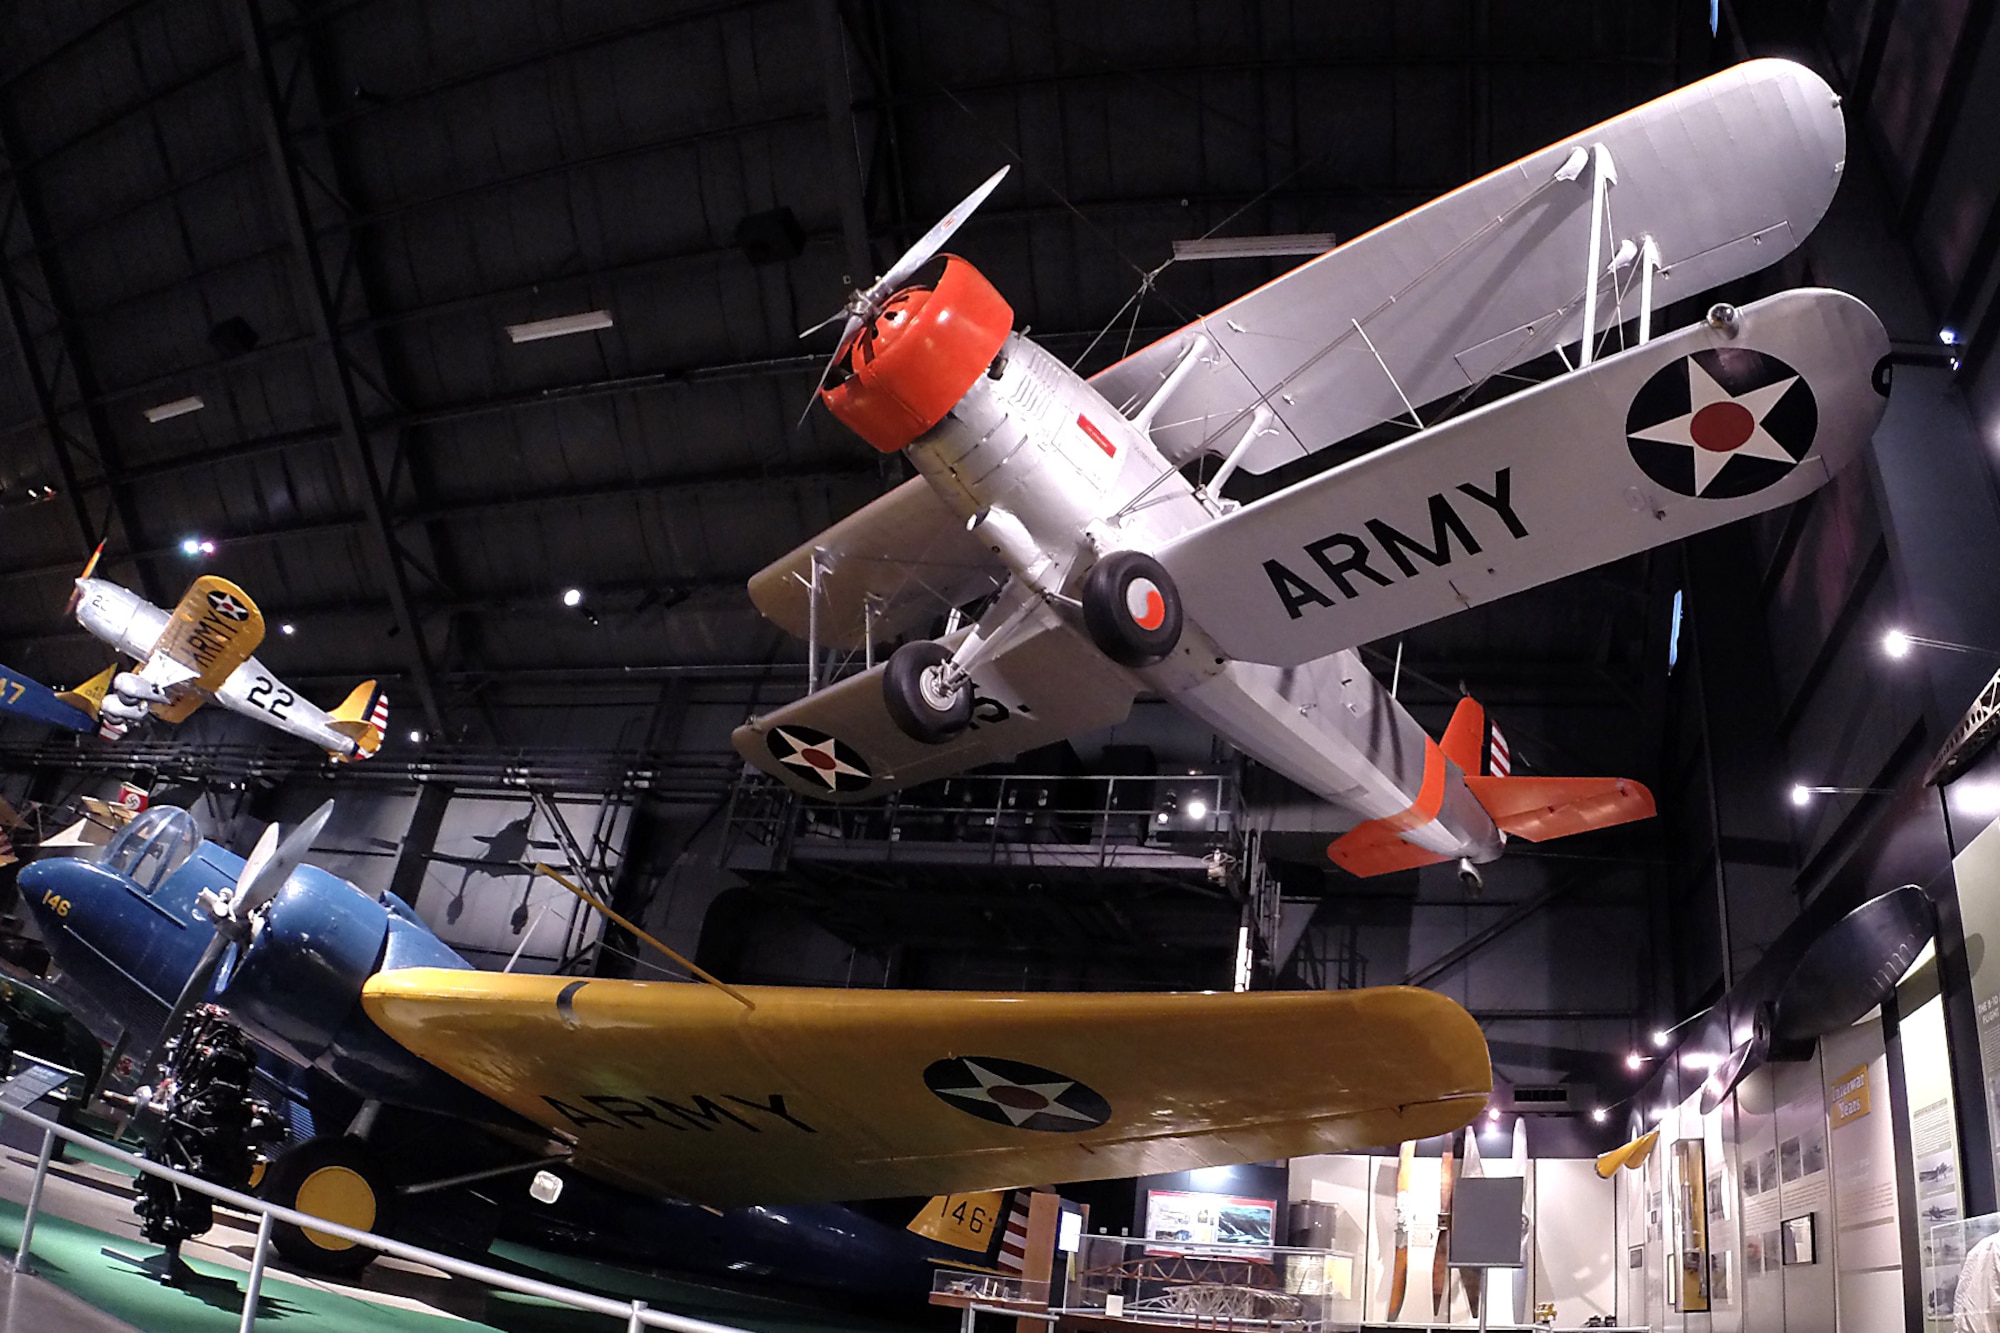 Douglas O-38F in the Early Years Gallery at the National Museum of the United States Air Force. (U.S. Air Force photo)
